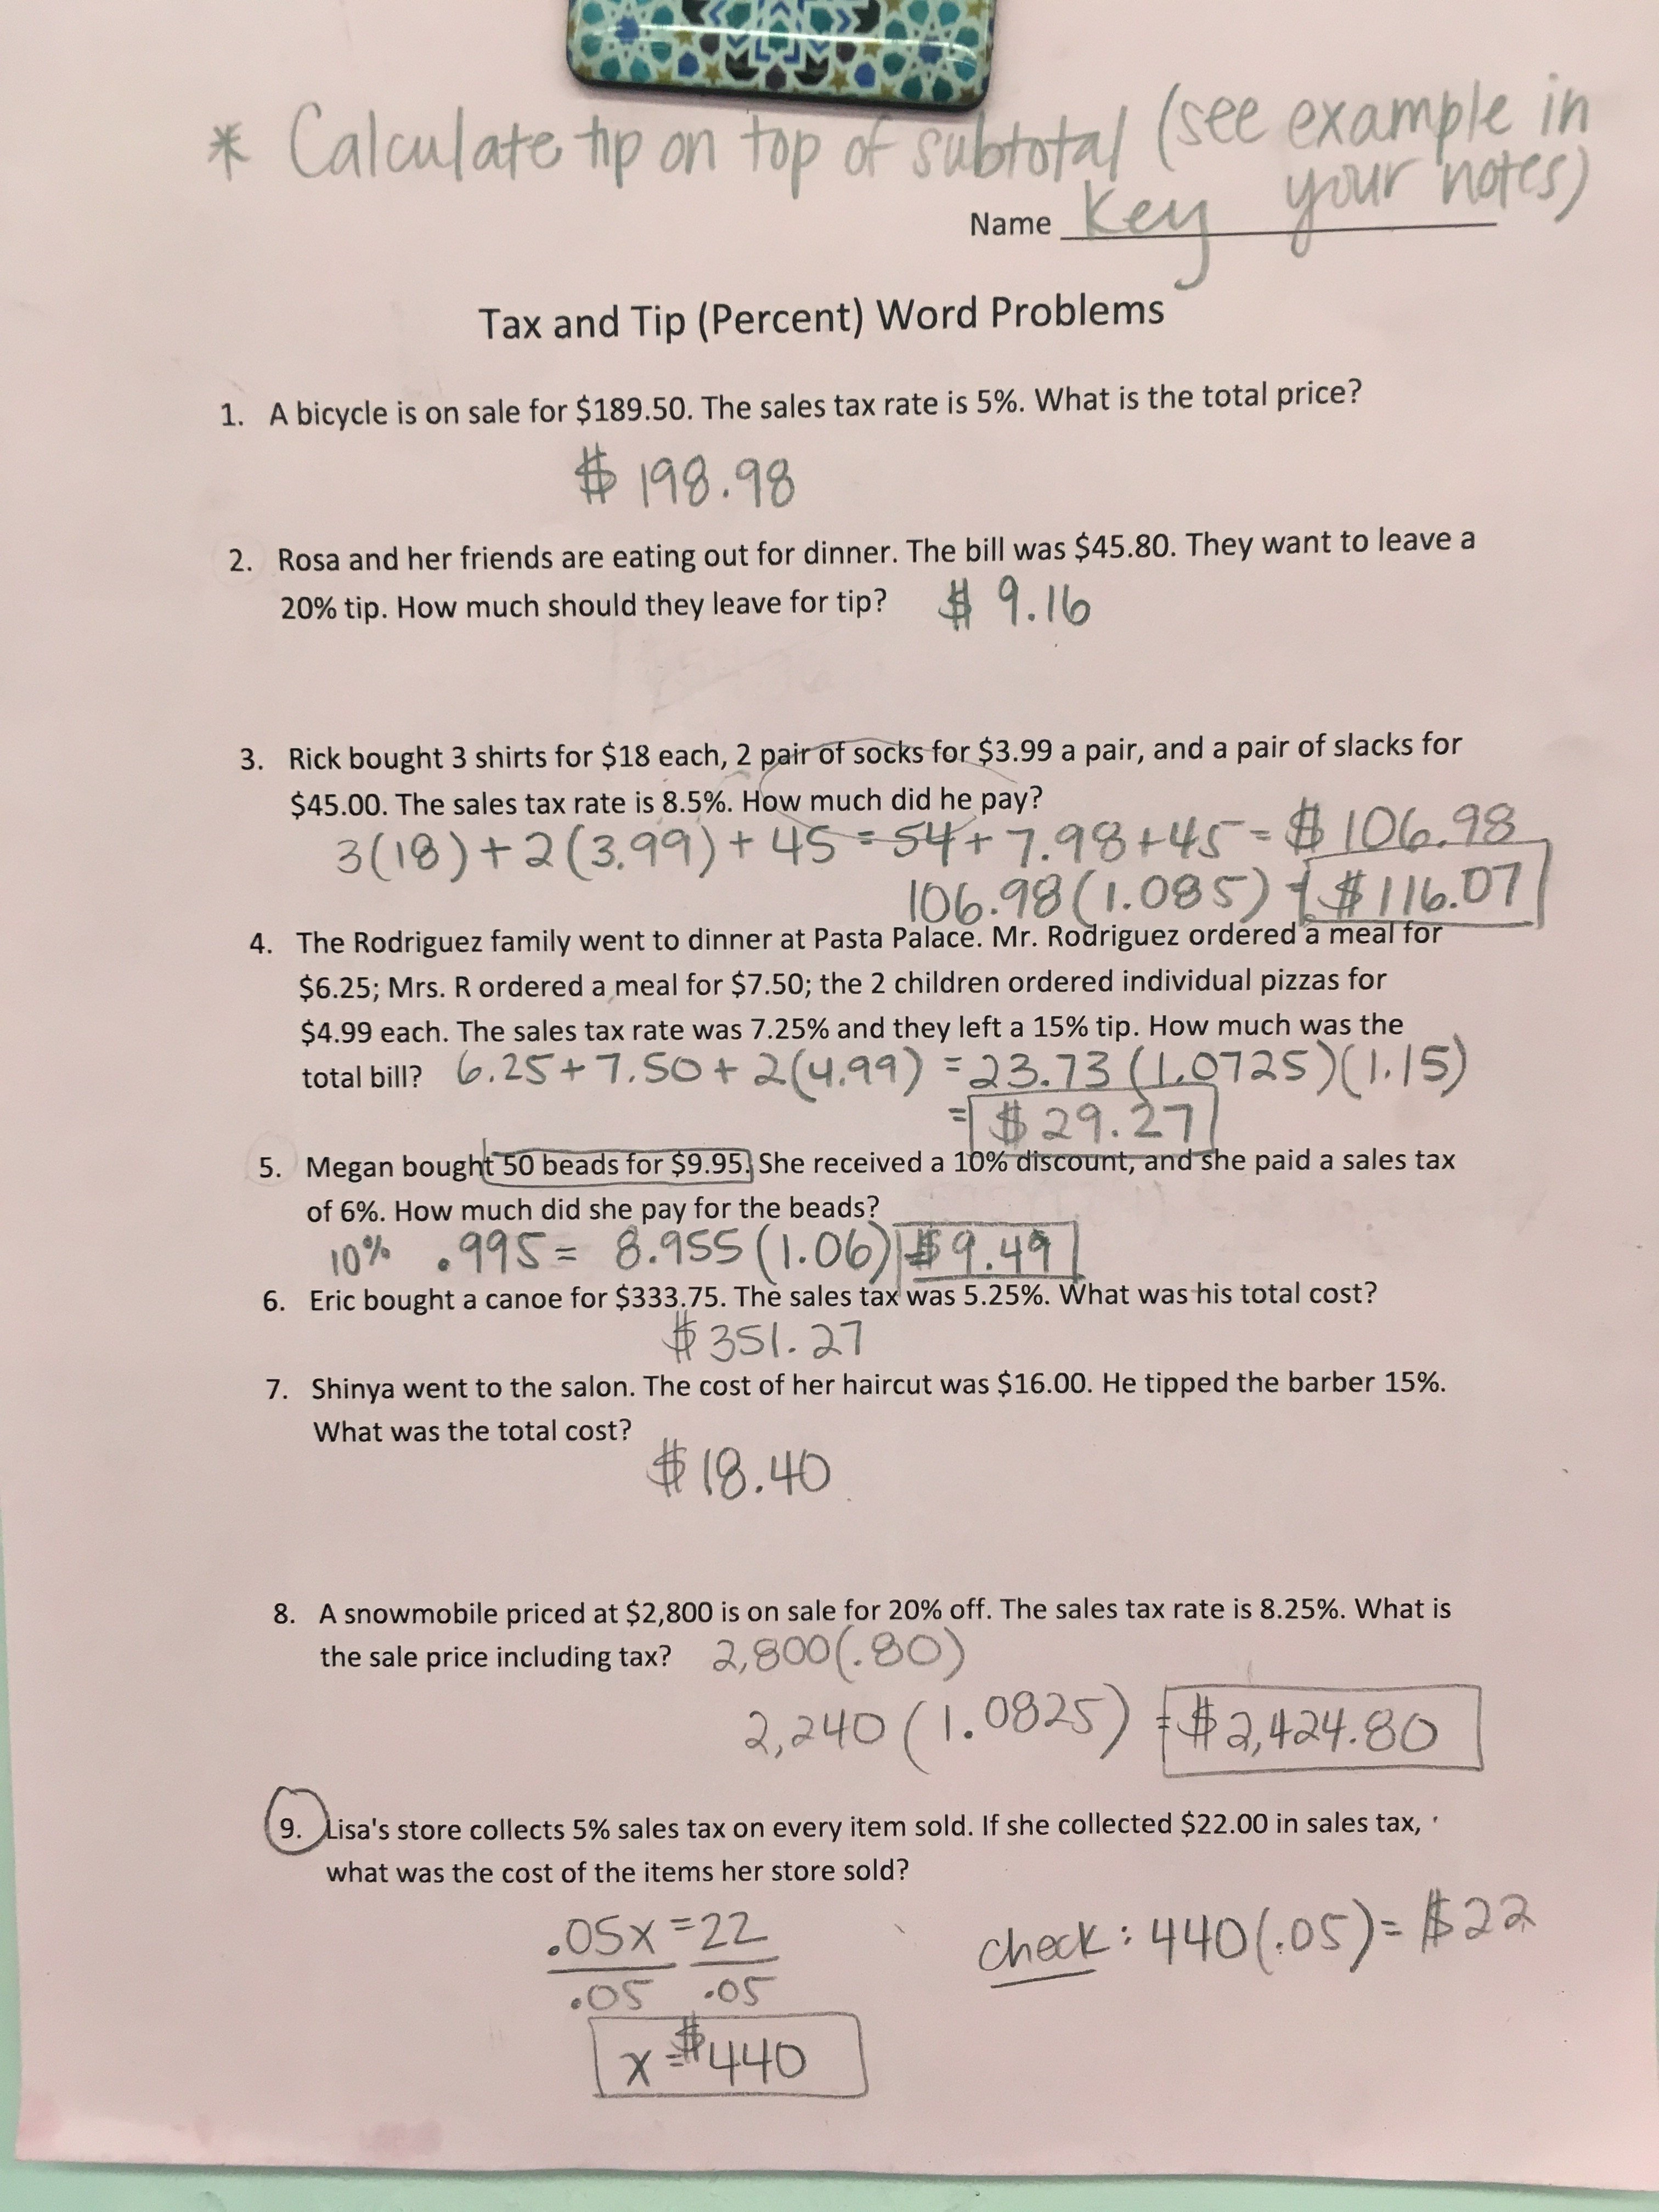 Tax Tip And Discount Word Problems Worksheet Answers  Yooob In Taxation Worksheet Answer Key